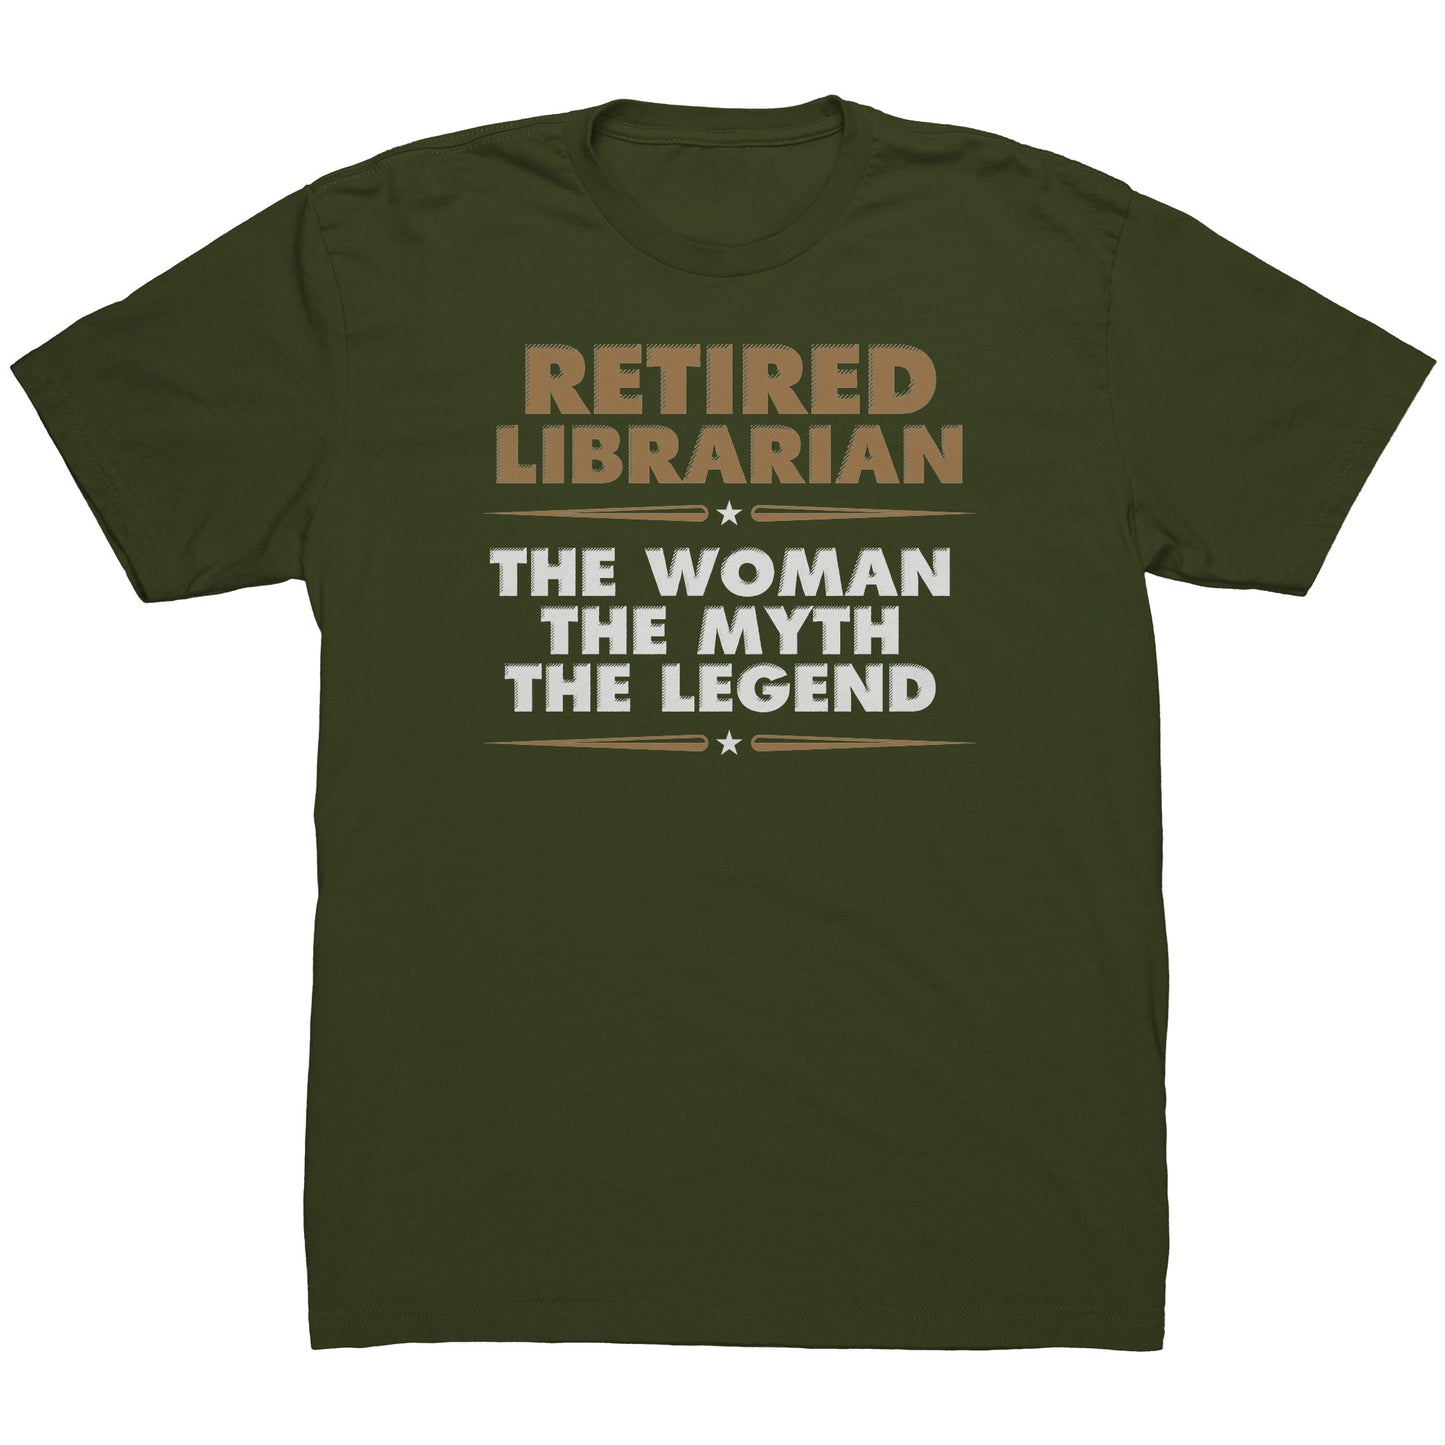 Retired Librarian. The Woman The Myth The Legend | Men's T-Shirt